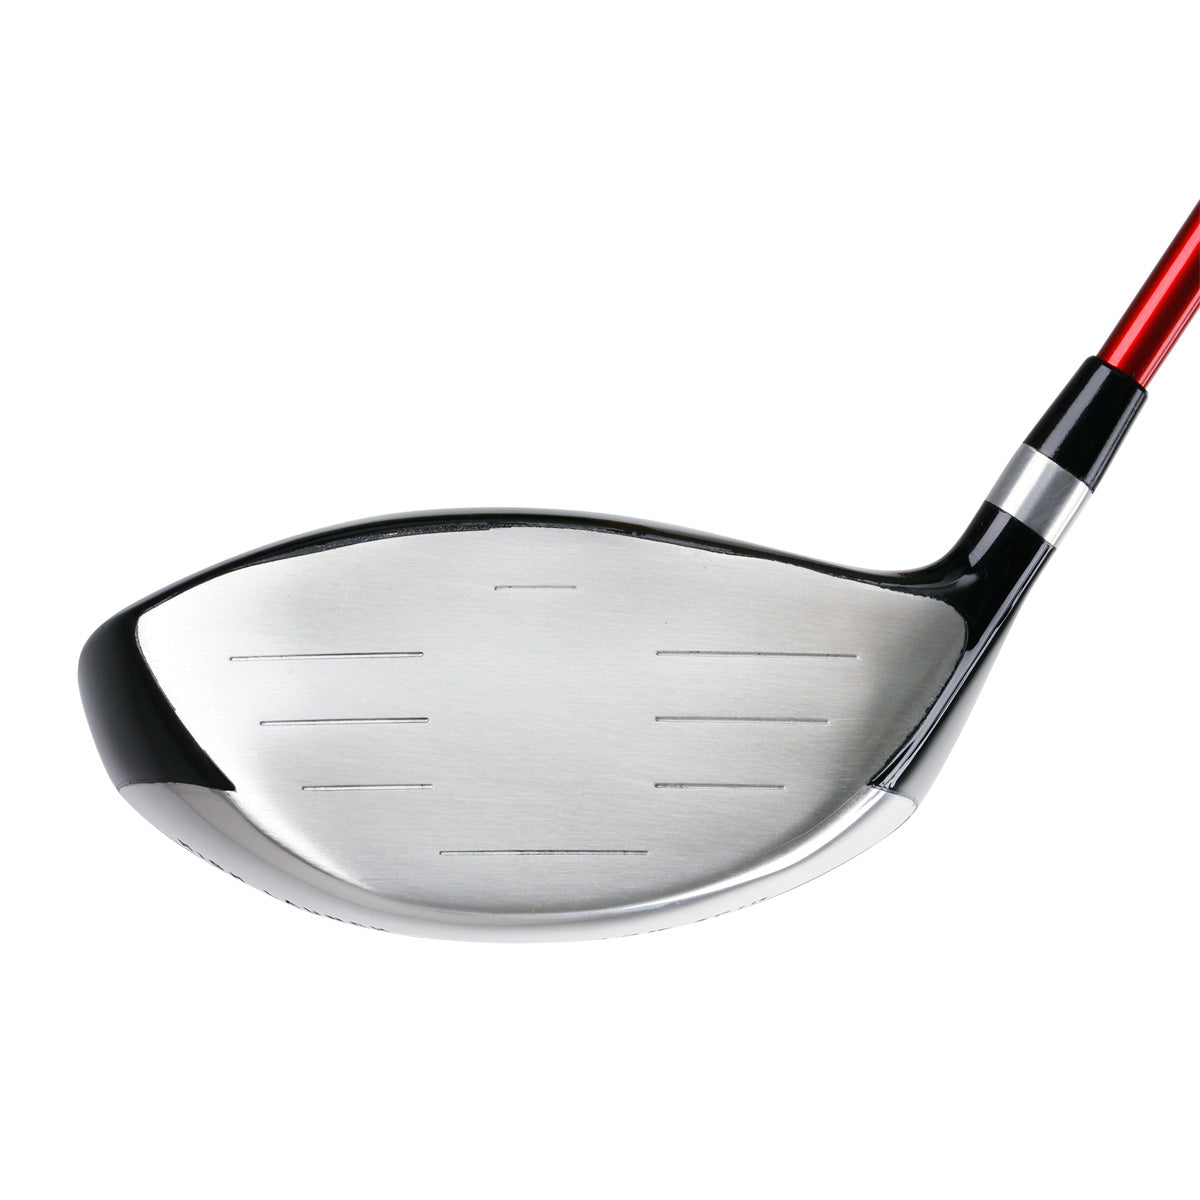 face view of the Intech Tec+ 460cc Golf Driver